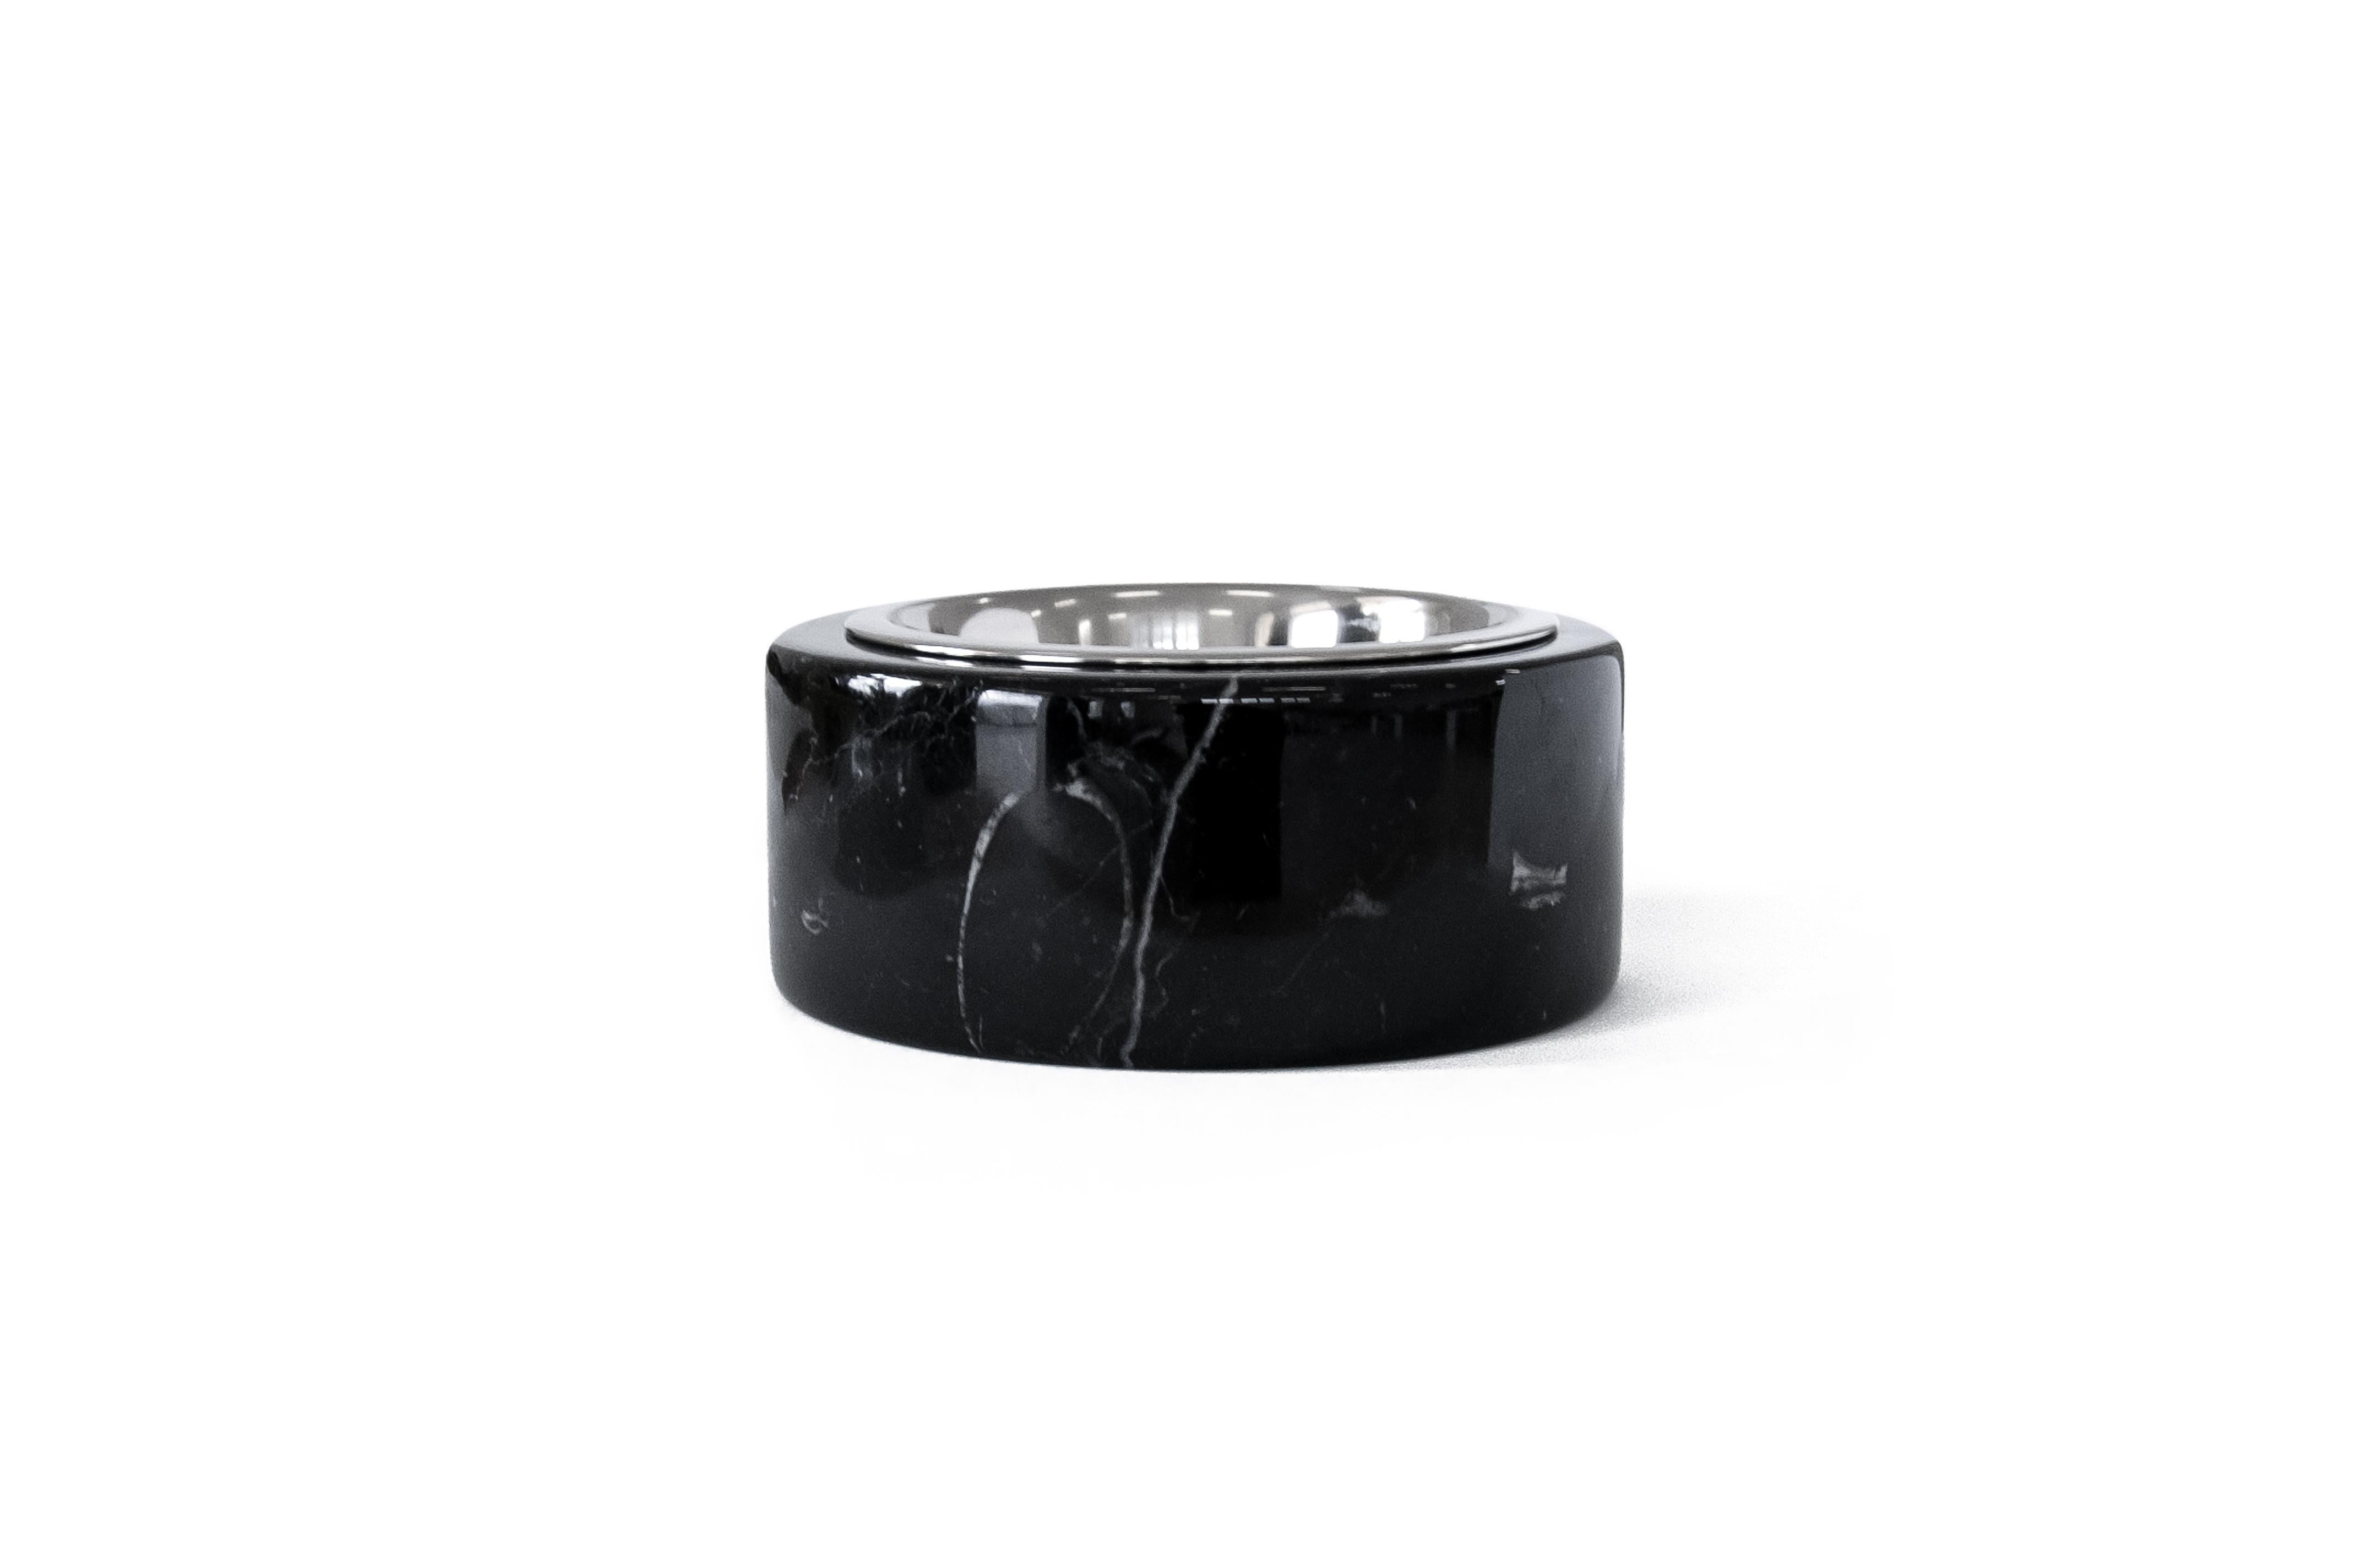 Rounded black Marquina marble bowl for cats and dogs with removable stainless steel bowl, made in Italy, Carrara. Size medium.
Each piece is in a way unique (every marble block is different in veins and shades) and handmade by Italian artisans